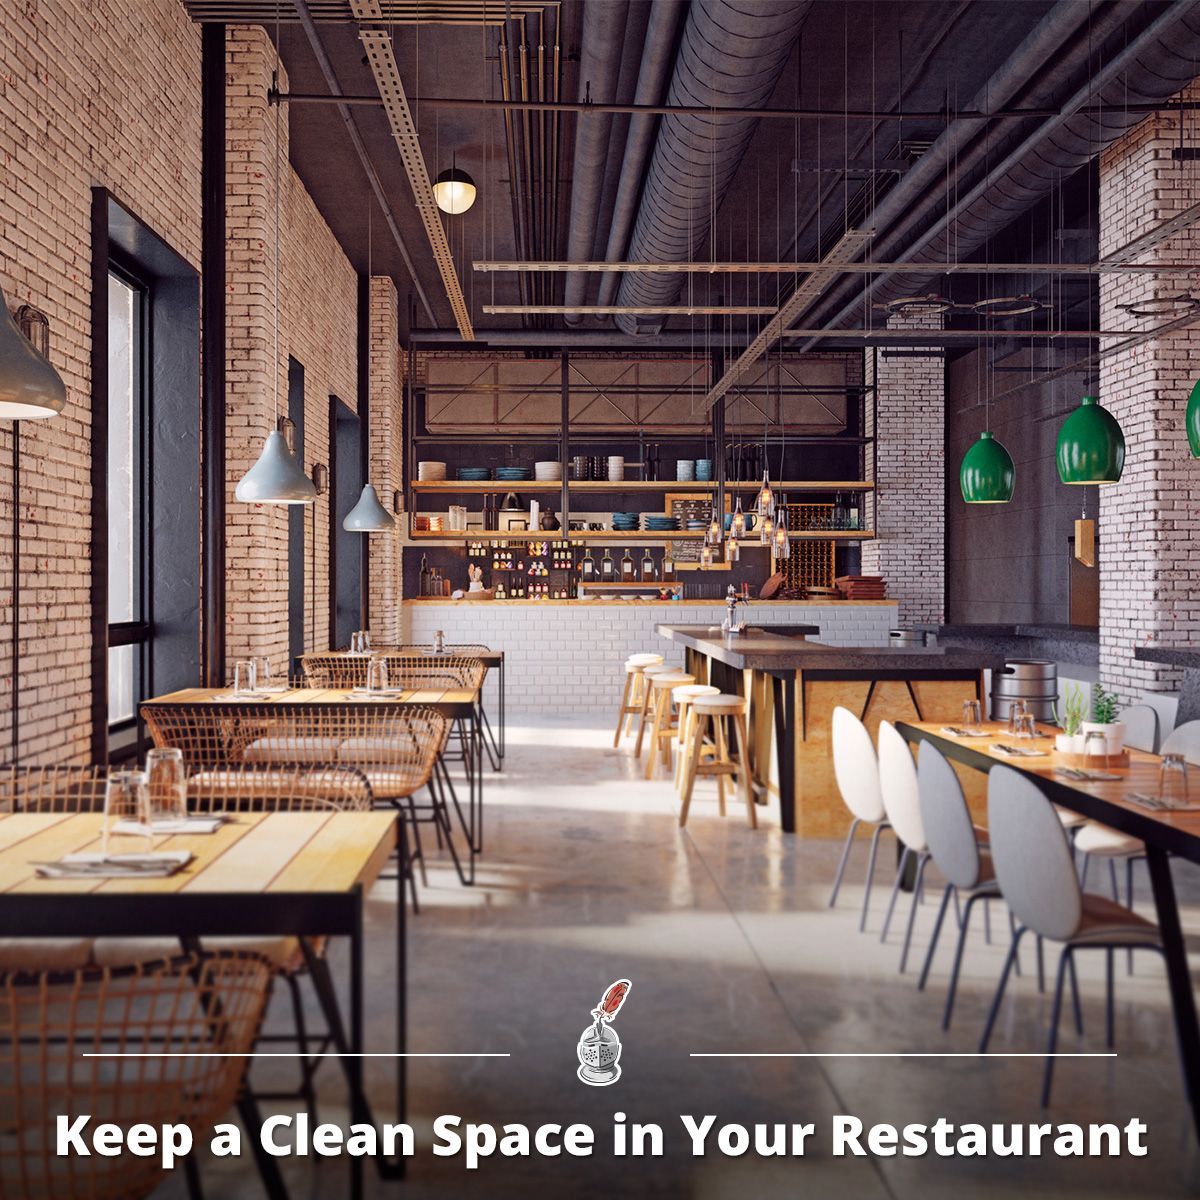 Keep a Clean Space in Your Restaurant